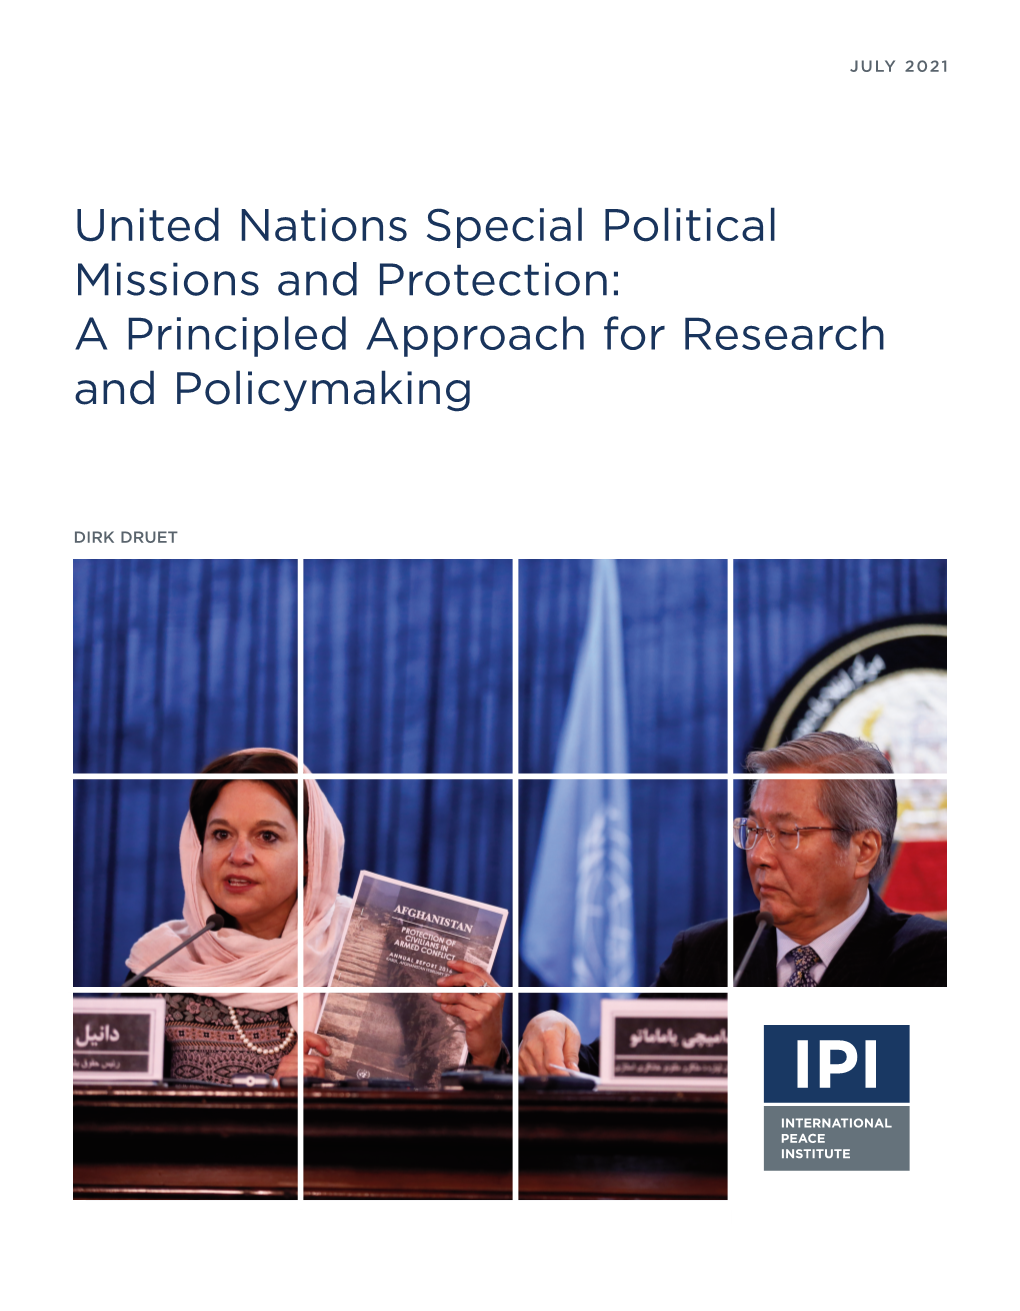 United Nations Special Political Missions and Protection: a Principled Approach for Research and Policymaking